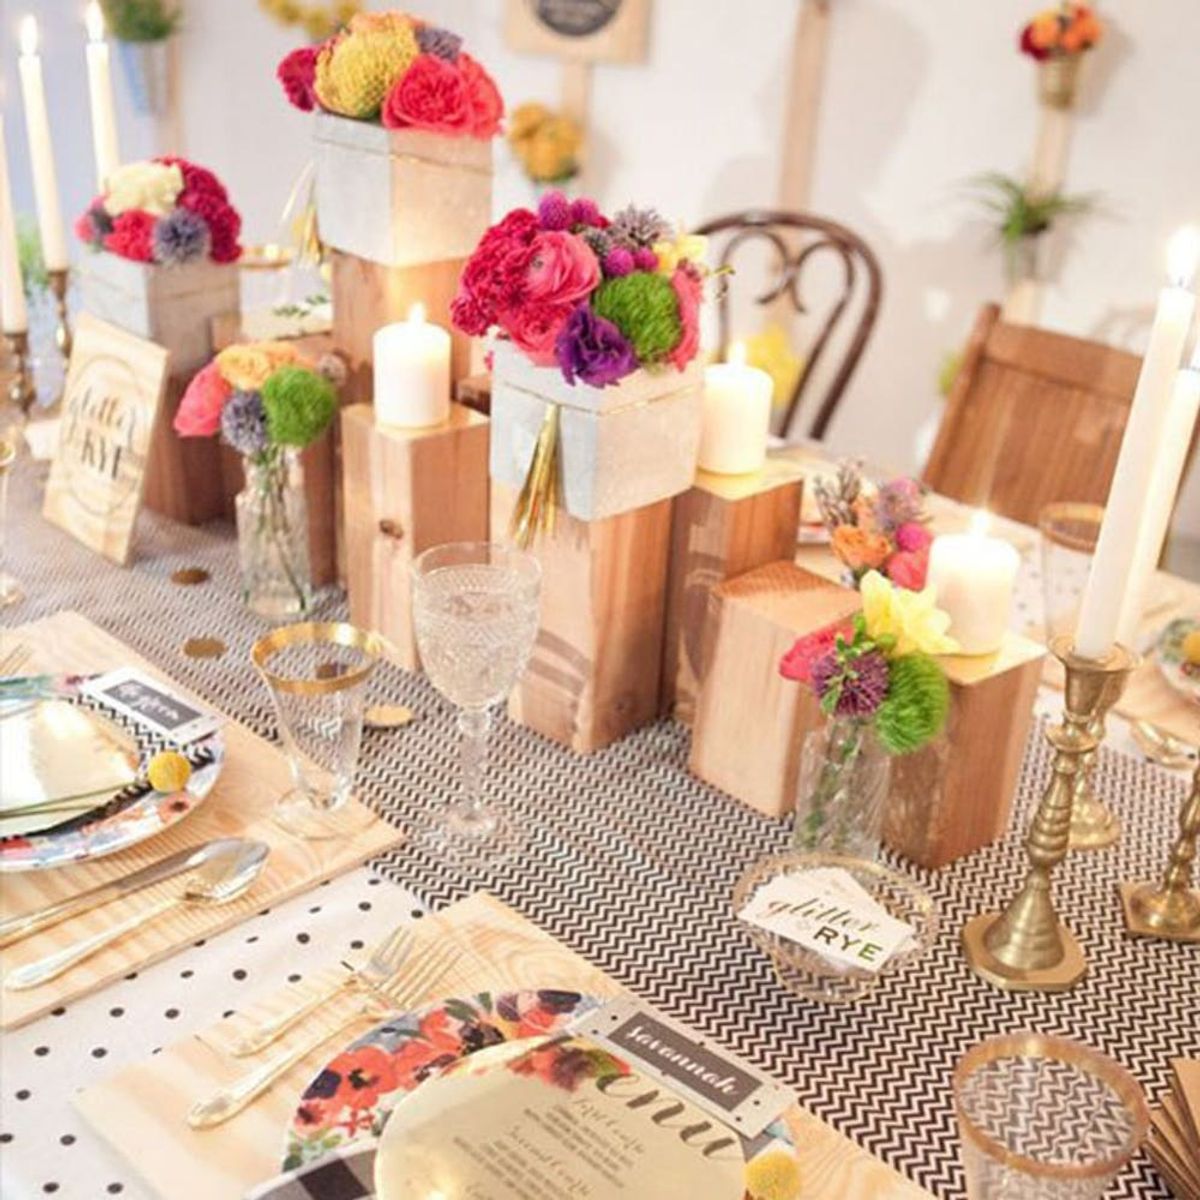 15 Unique Wedding Tablescapes That Take the Cake